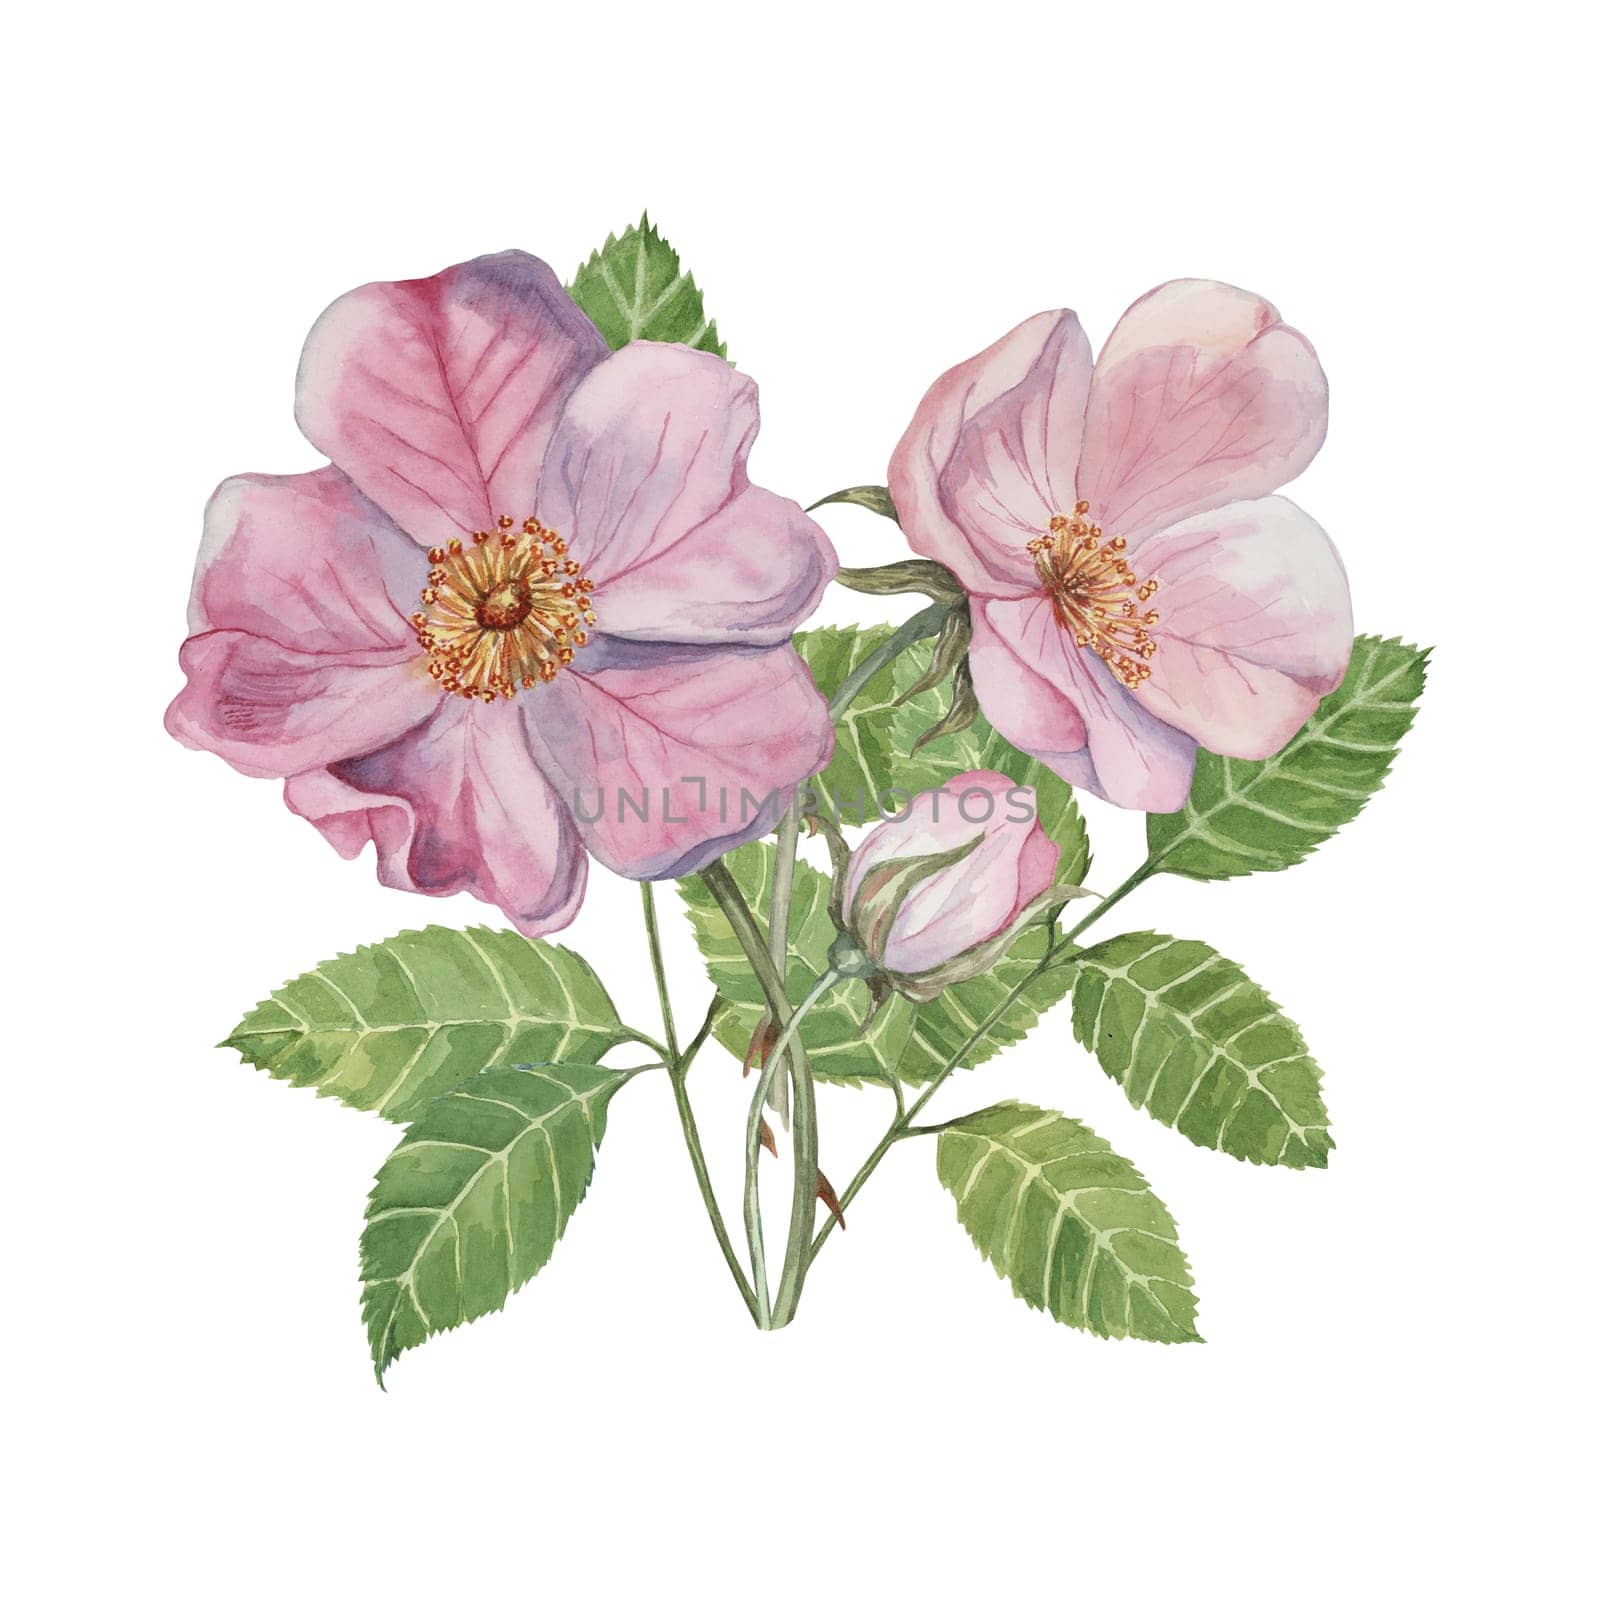 Dog rose bouquet, rosa canina watercolor floral clipart. Pink flower bundle, rose hips, buds and leaf of wild rose. Botanical briar boutonniere for printing, beauty, cosmetics, perfume, labels, food